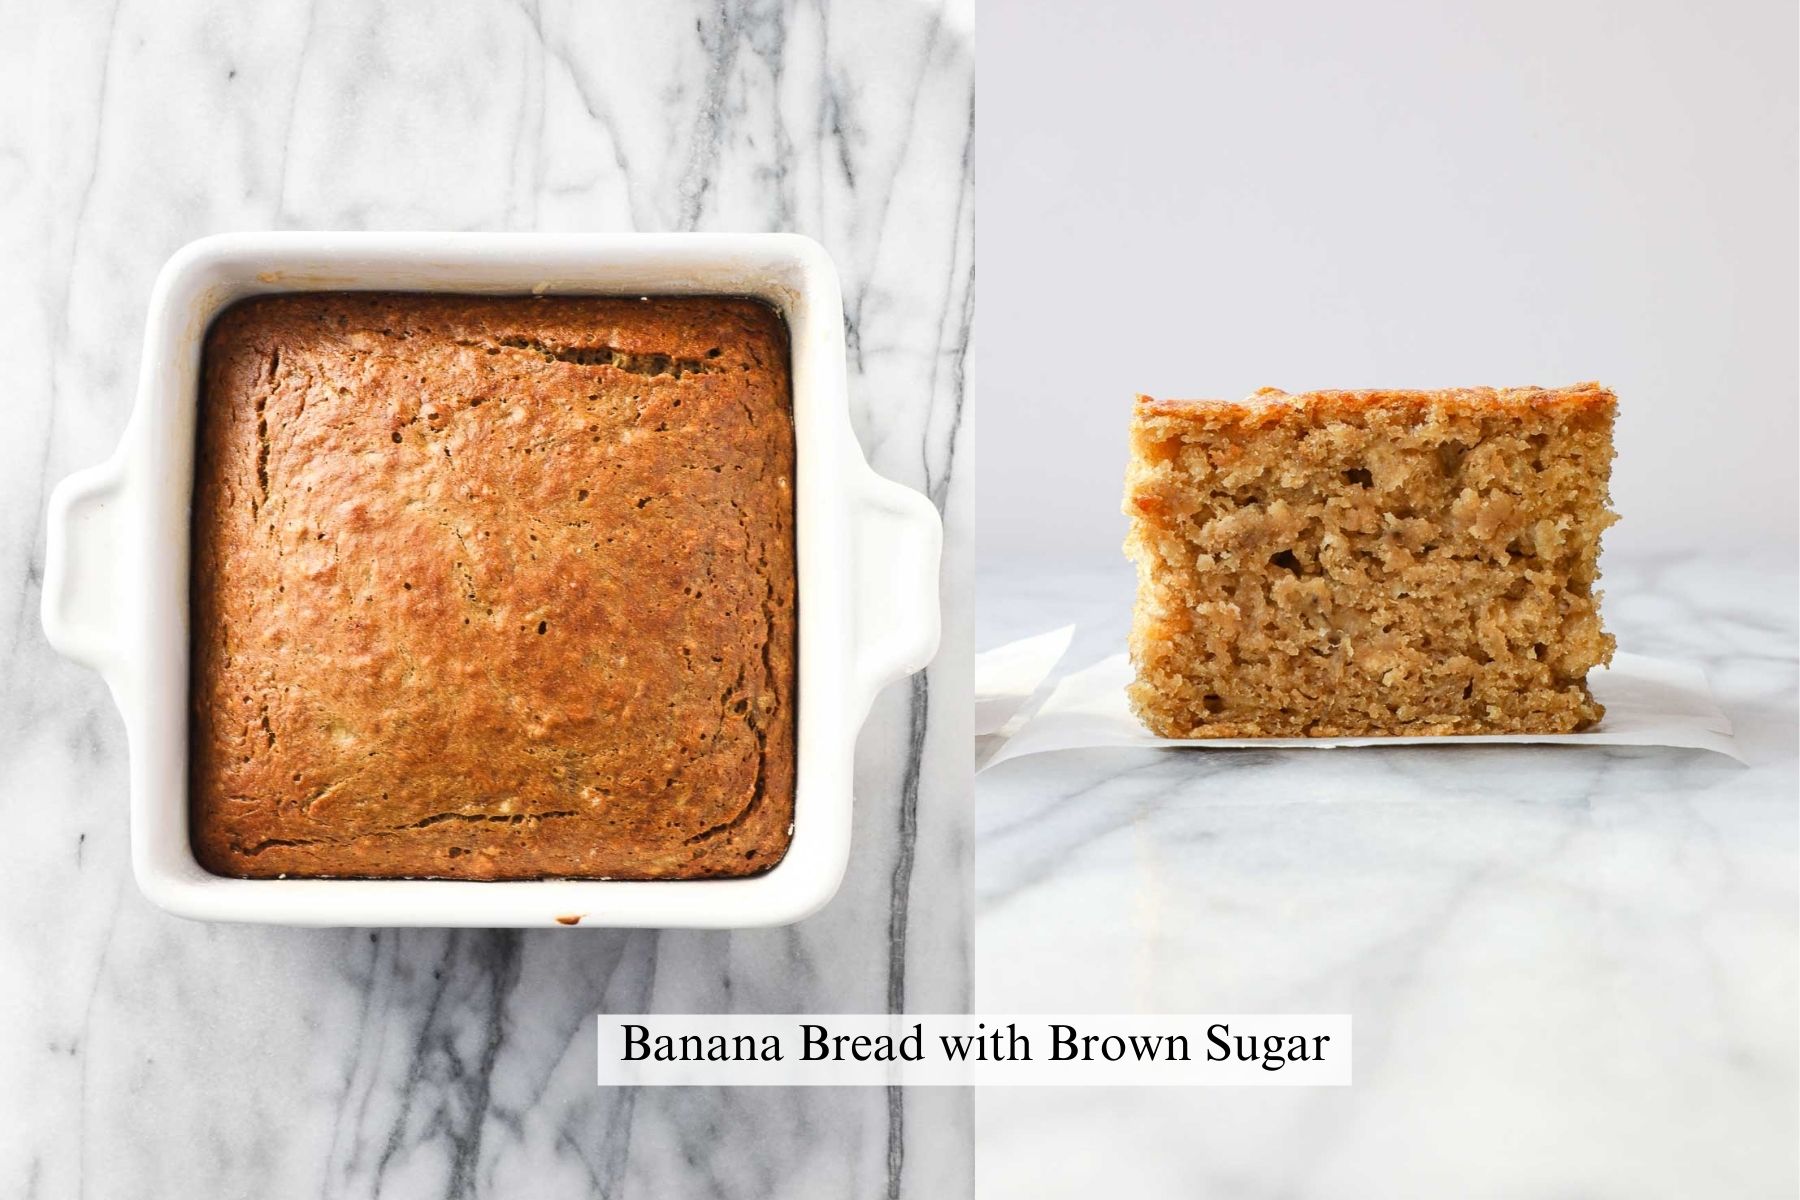 On overhead view of banana bread in a square baking dish made with brown sugar next to a cross section view of a slice of that same banana bread.